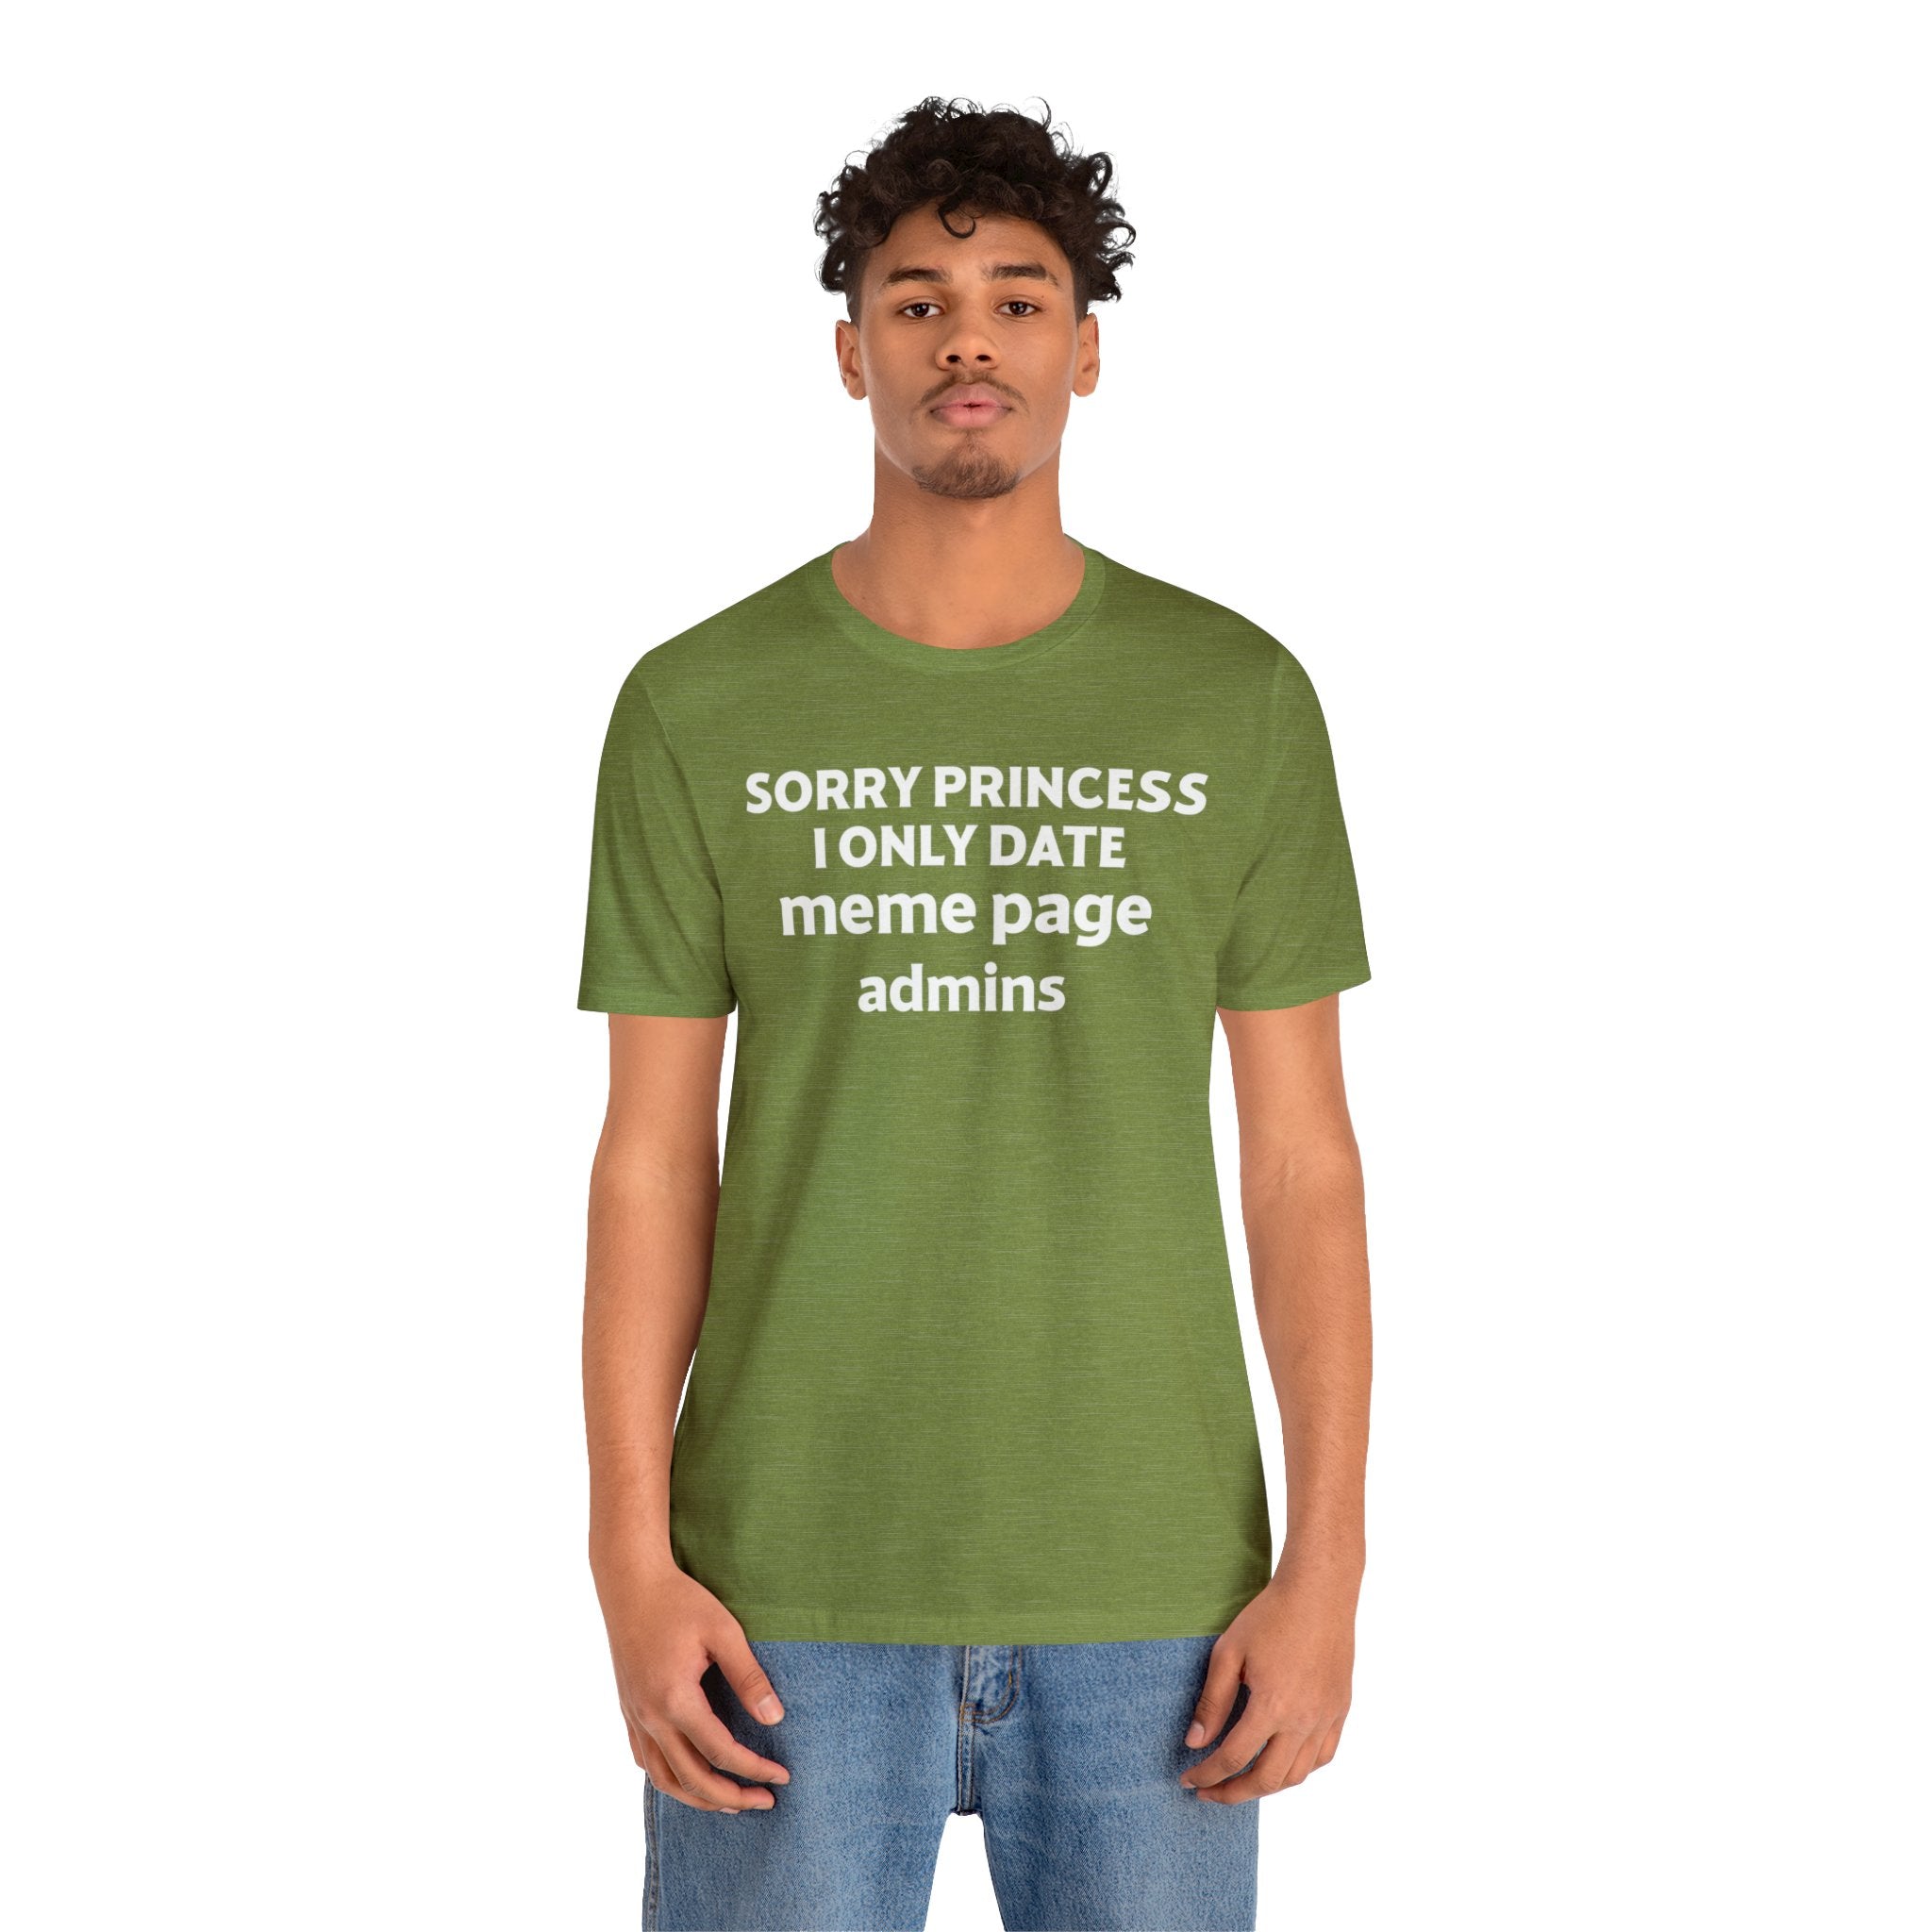 A man wearing a Sorry Princess T-Shirt meme page admins ordered today.